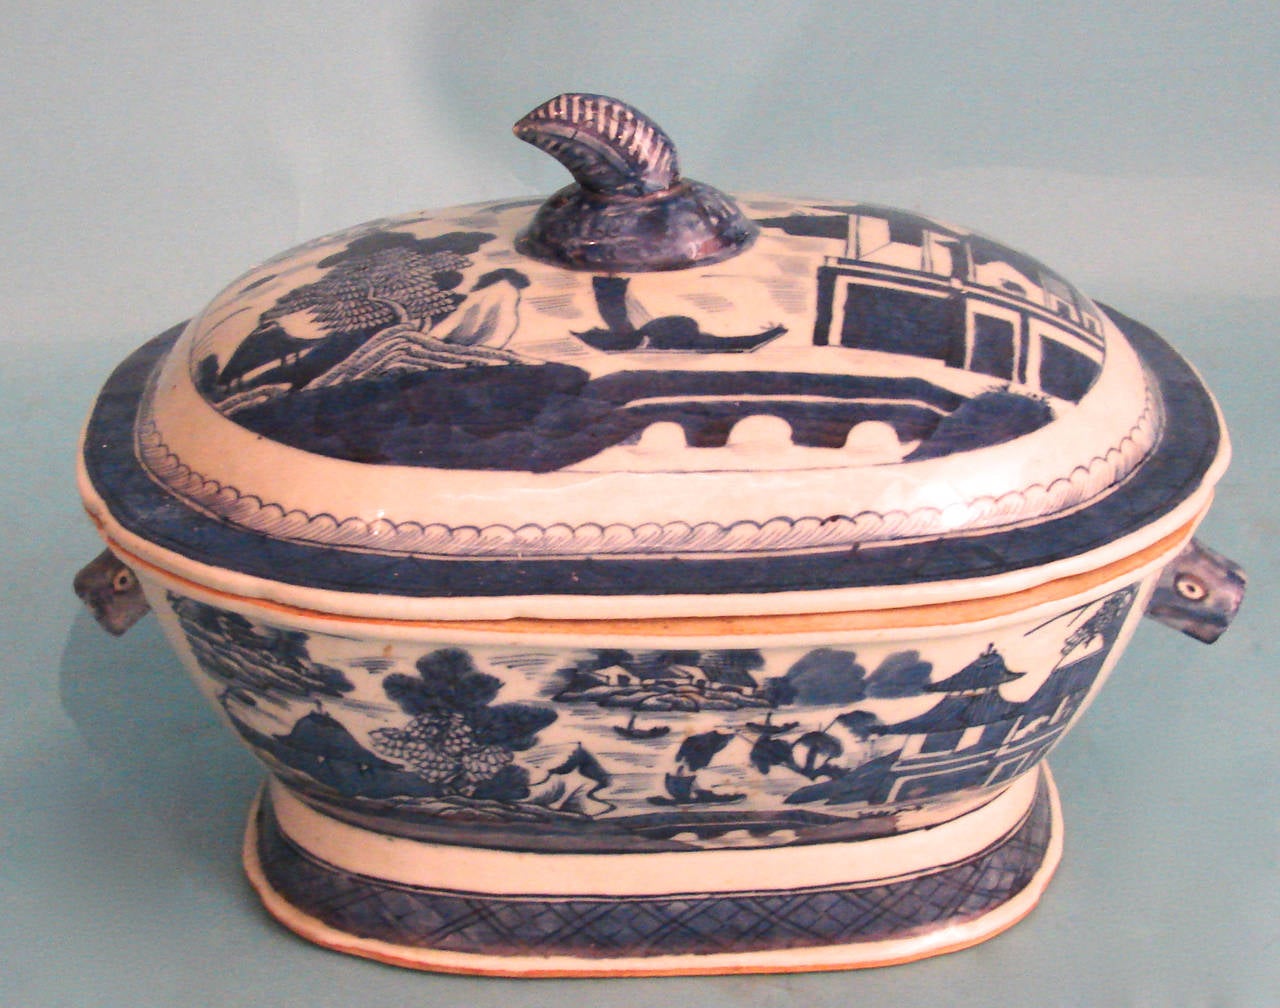 A Chinese export canton blue and white soup tureen with cover, the body with boar's head handles, the top with a stem finial, decorated overall in typical fashion with buildings in a river and mountain setting, circa 1860.